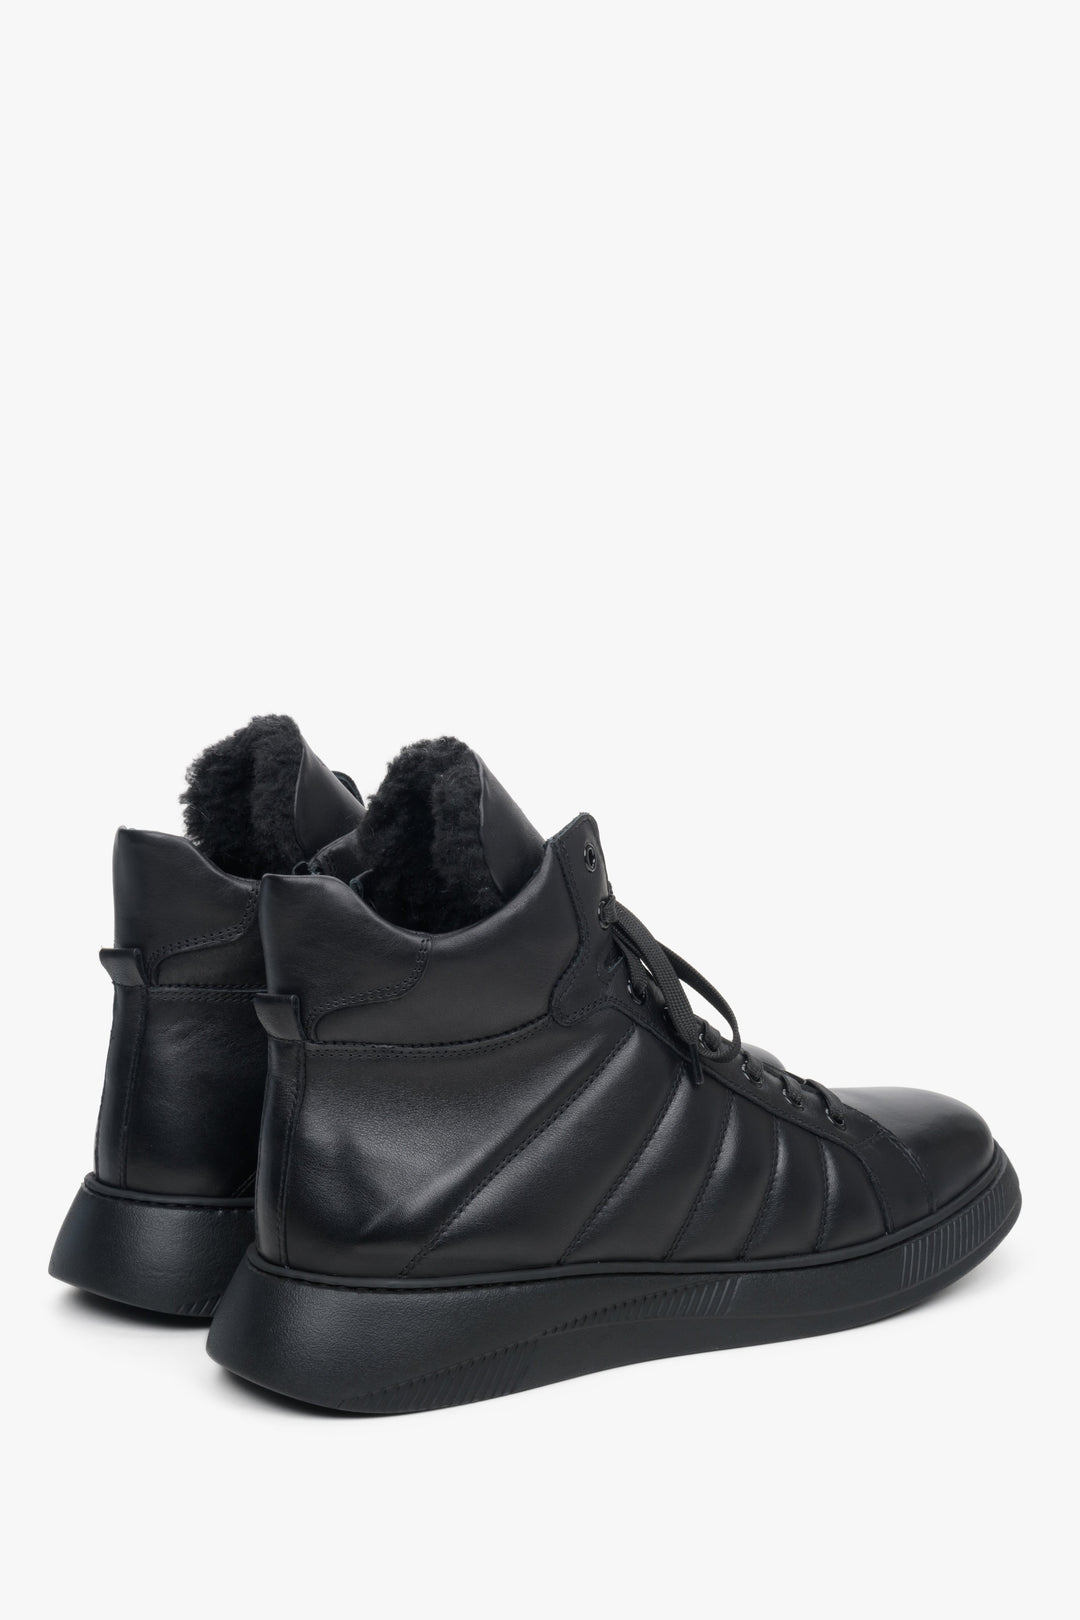 Estro high-top leather men's sneakers in black - close-up on the side seam and heel.